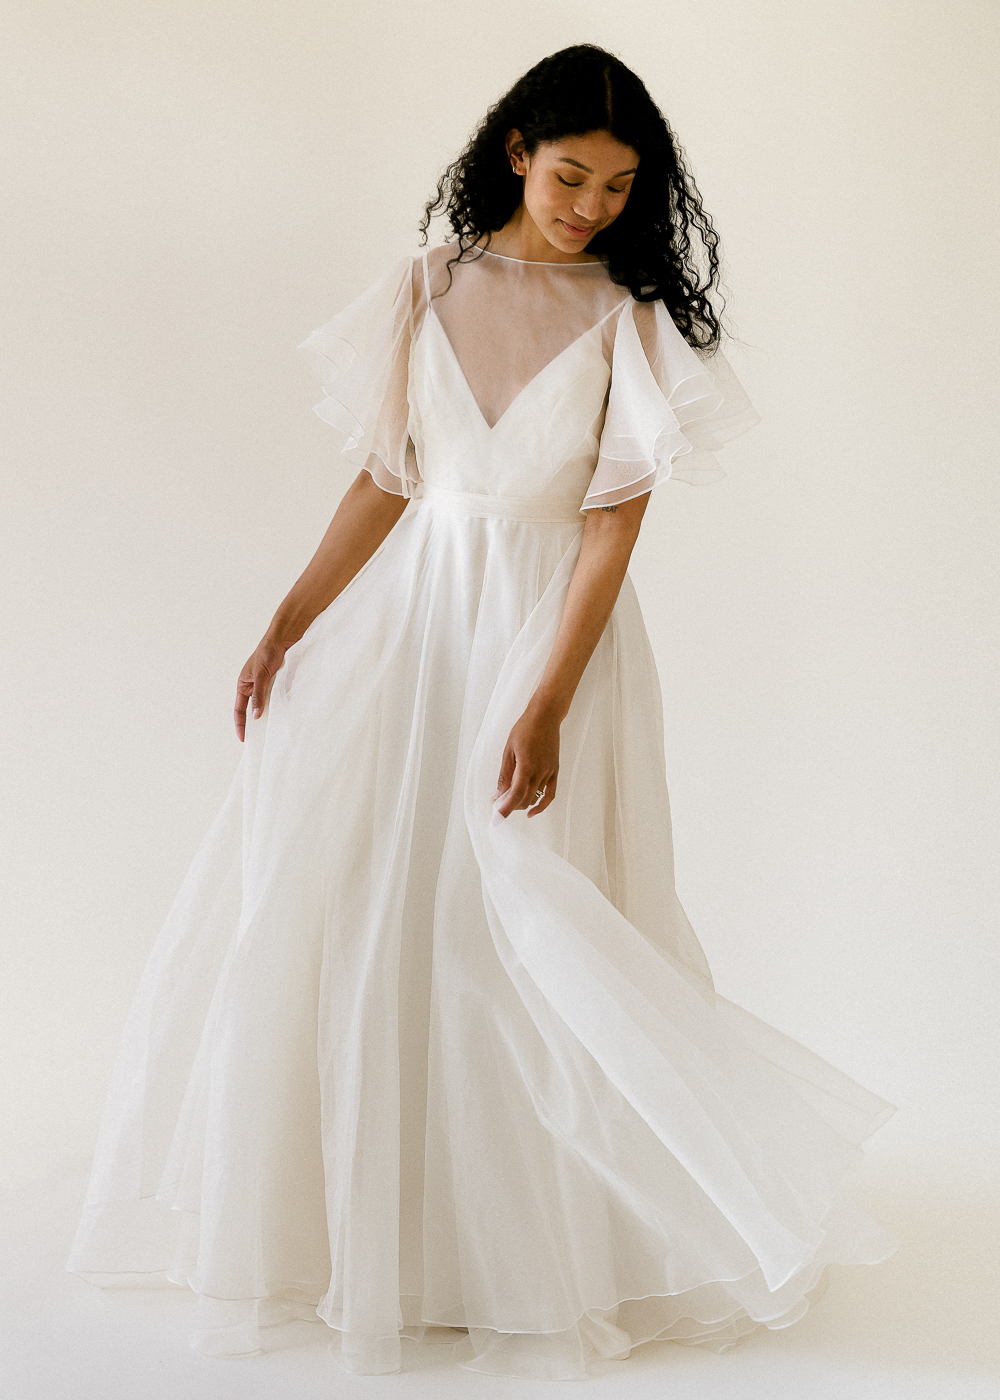 Romantic Canadian made wedding gown for the 2022 wedding season